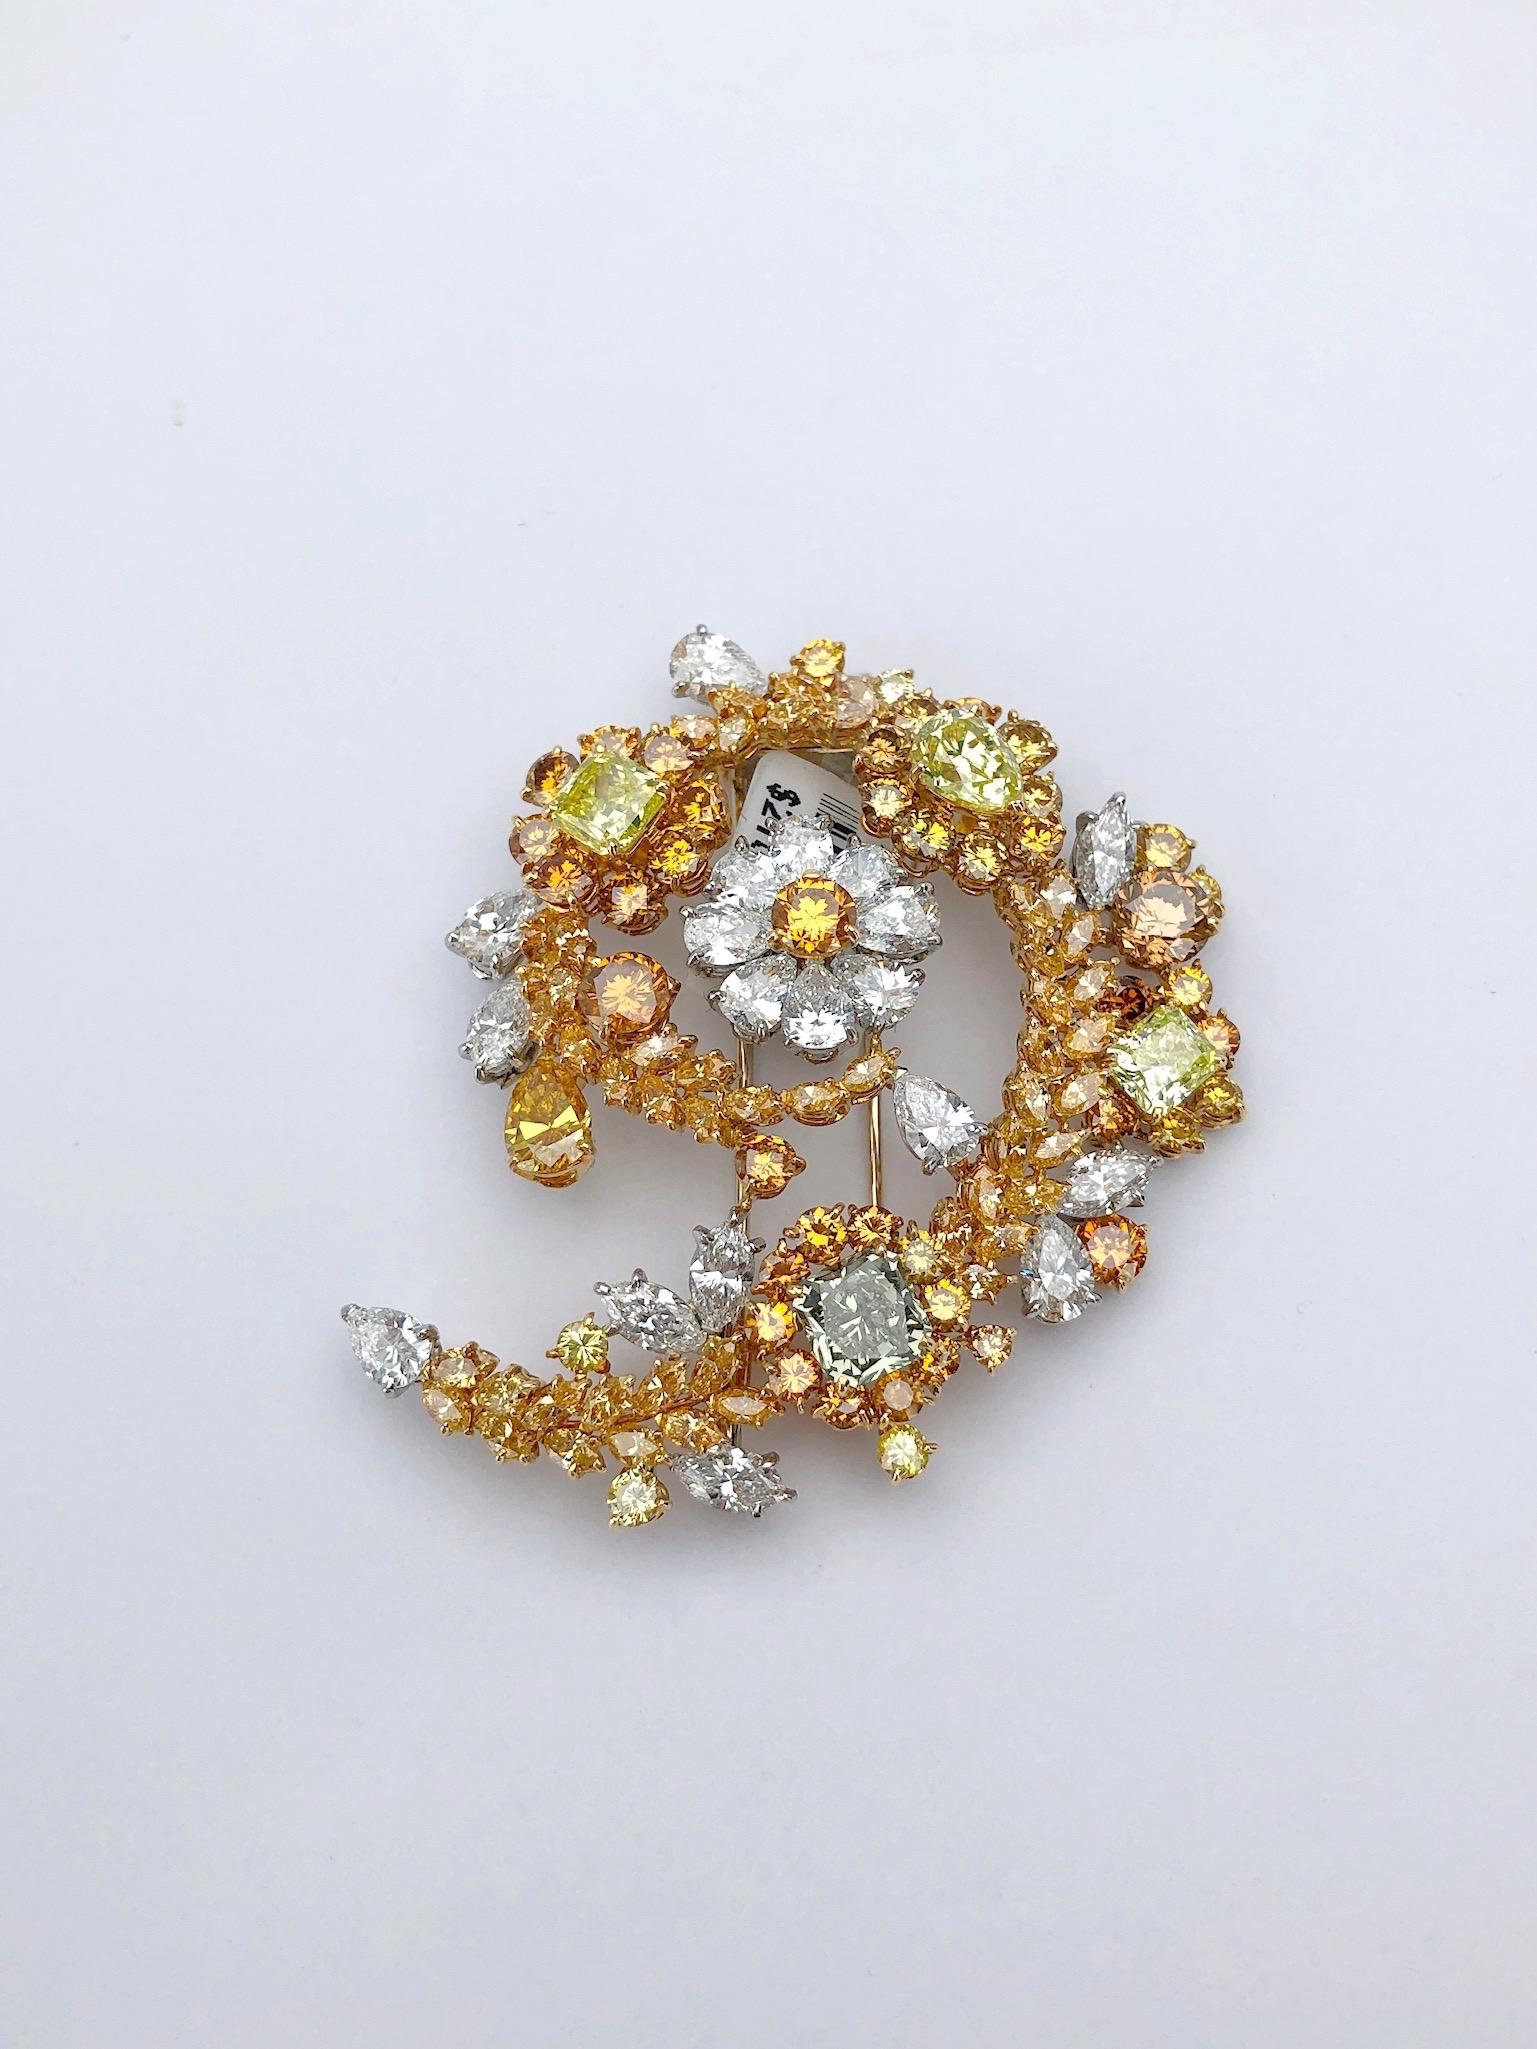 Mixed Cut Cellini 18 Karat Yellow Gold Brooch 19.85 Carat Natural Fancy Colored Diamonds For Sale